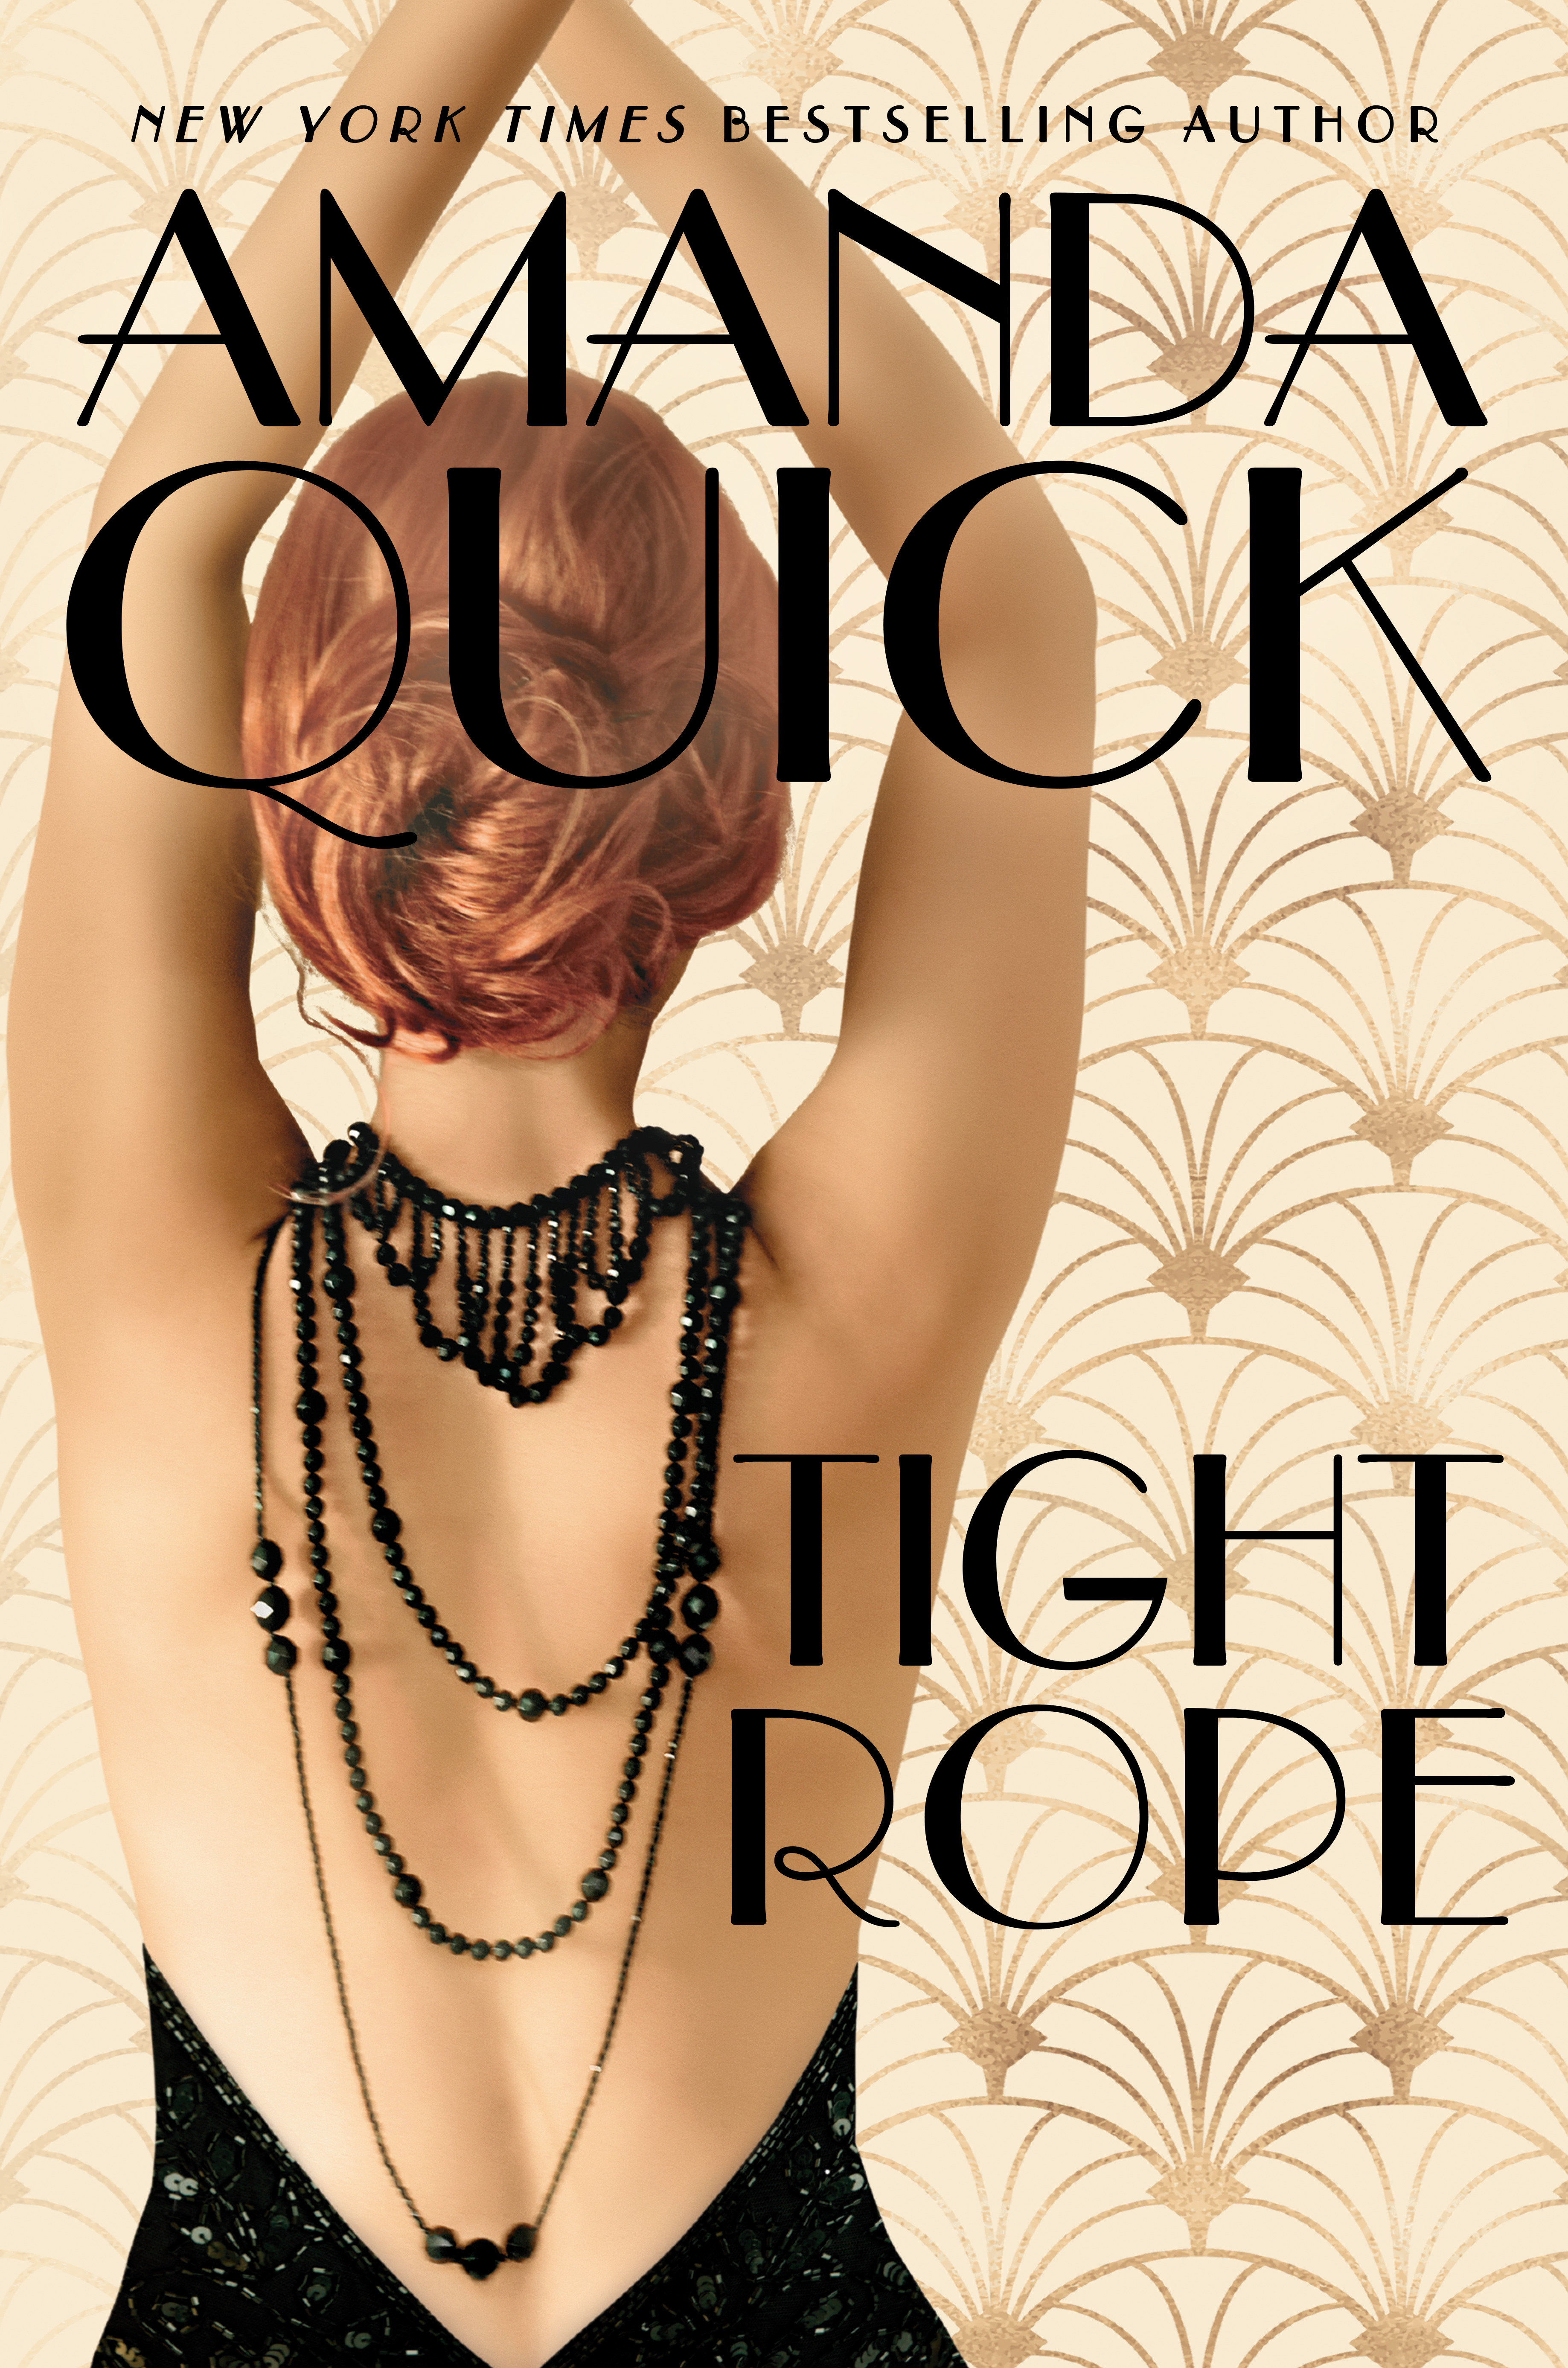 Tightrope cover image